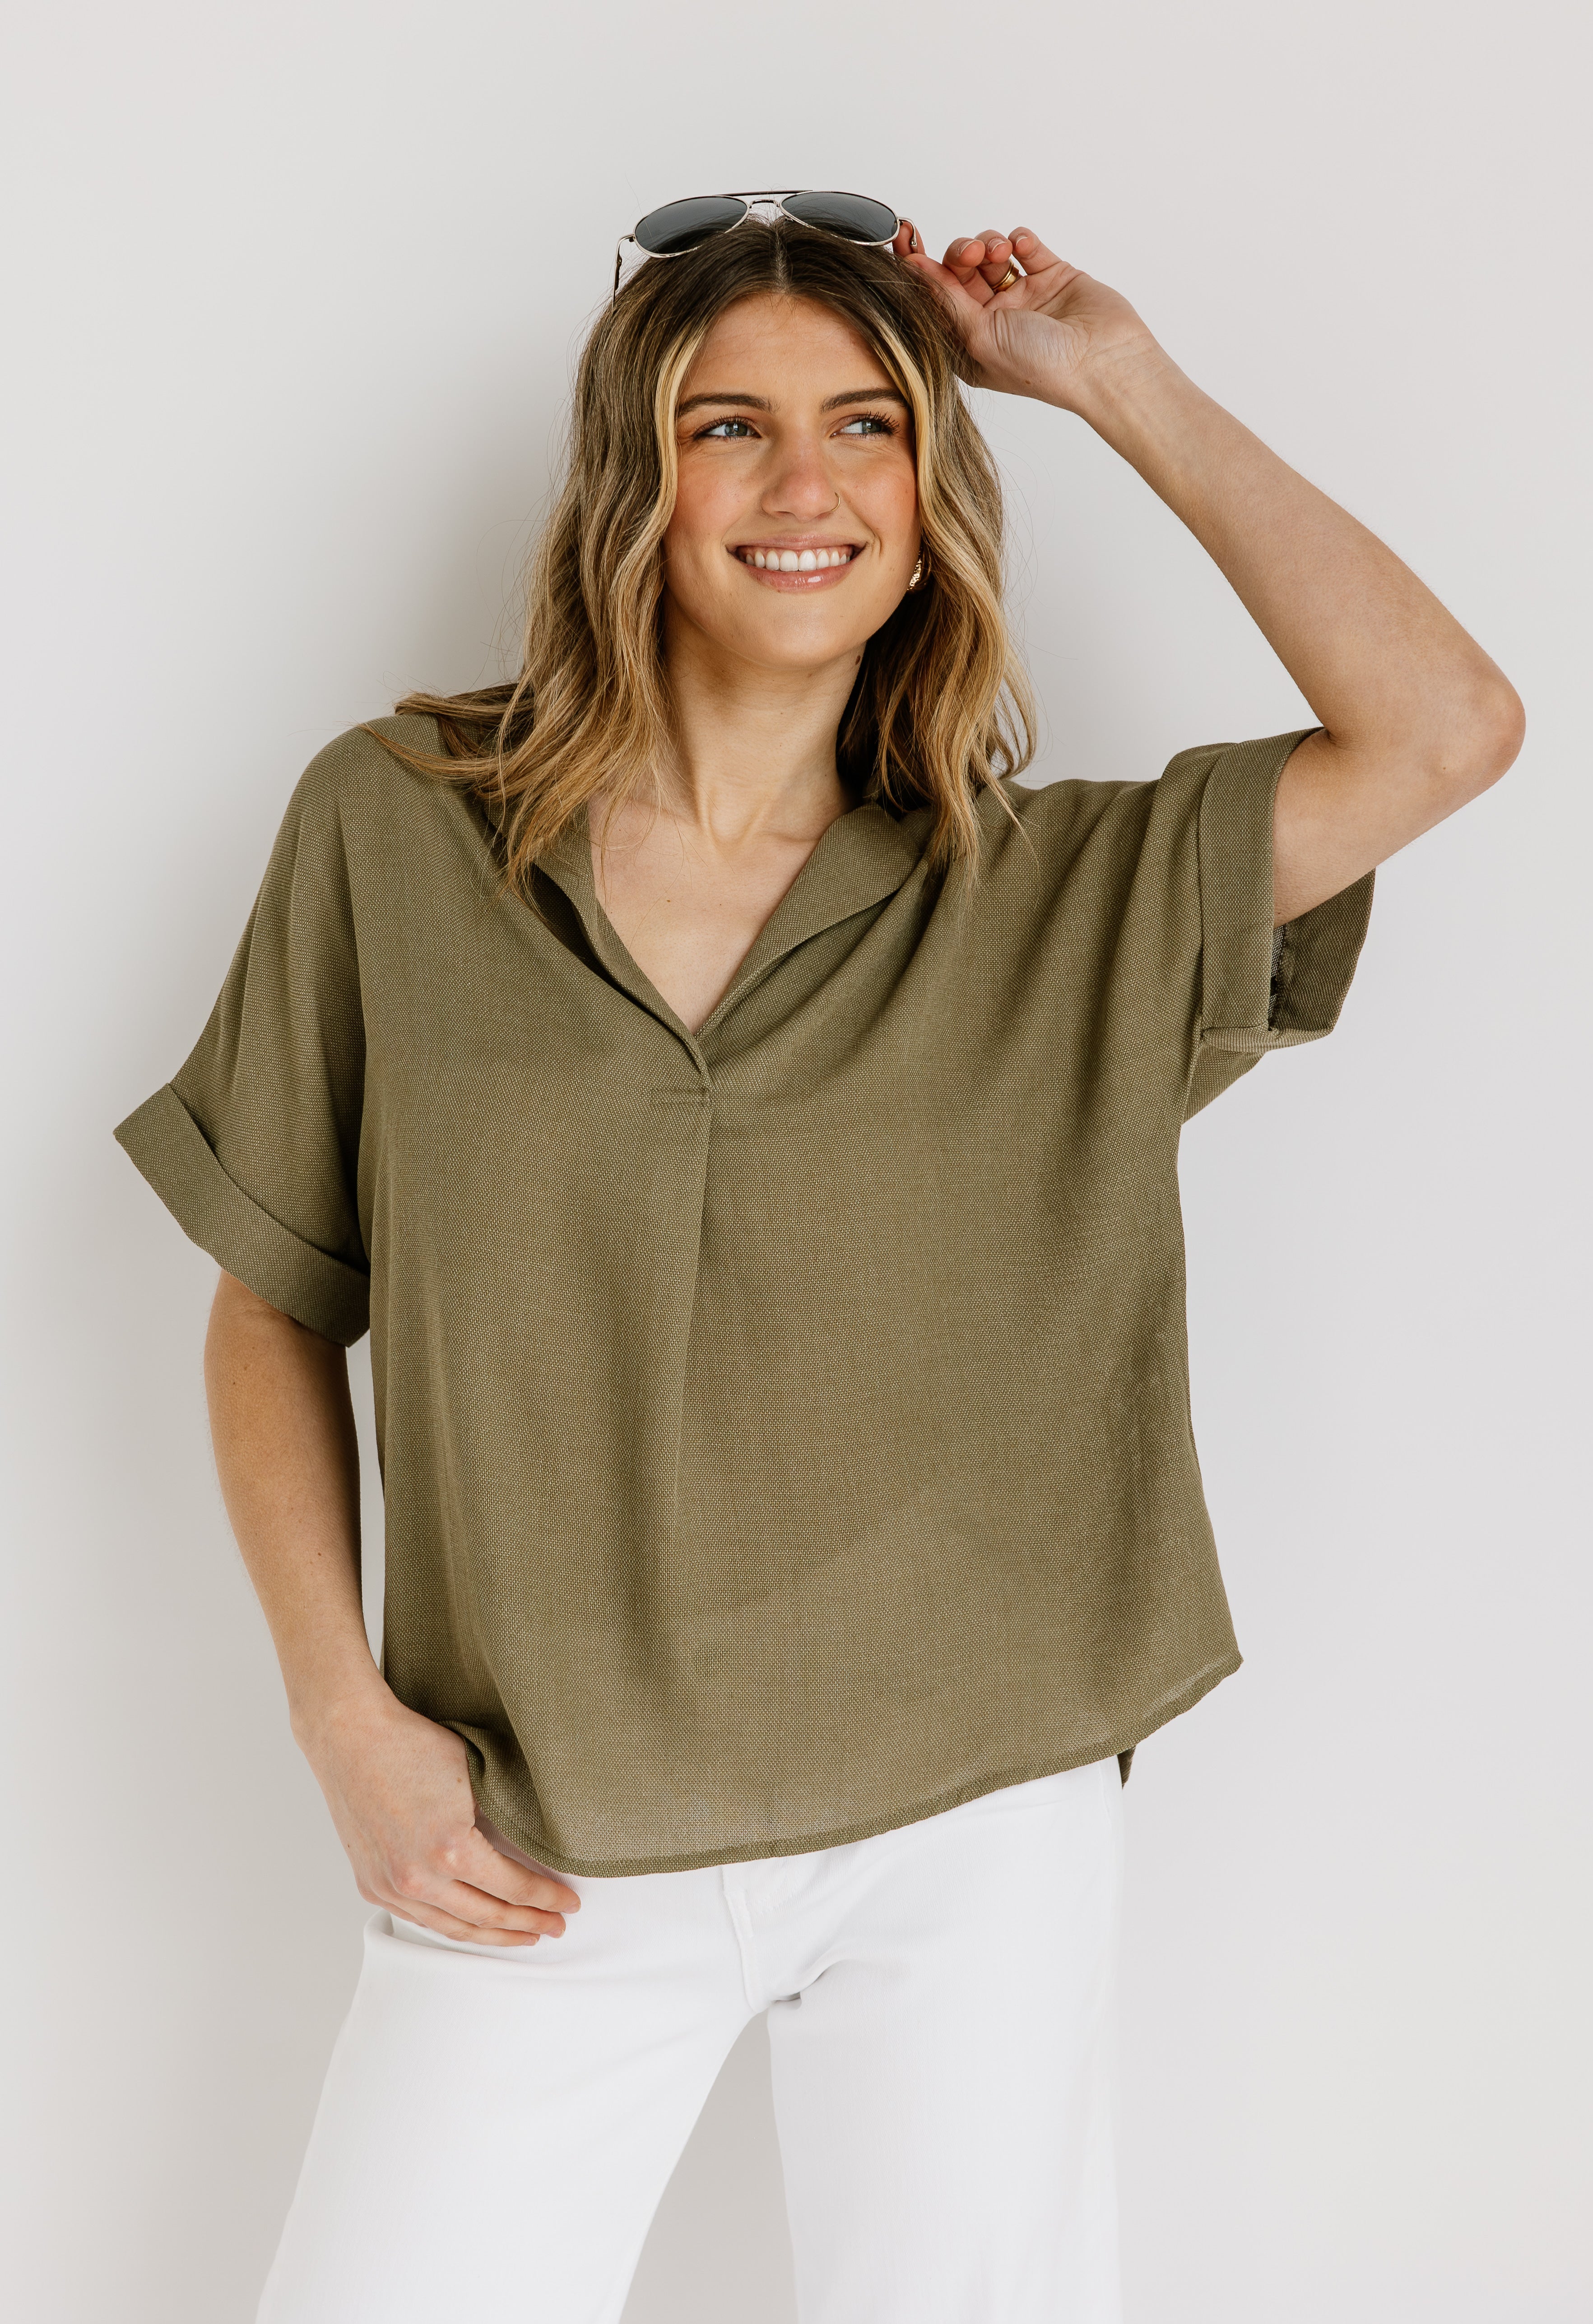 No Doubt Blouse - OLIVE - willows clothing Blouse